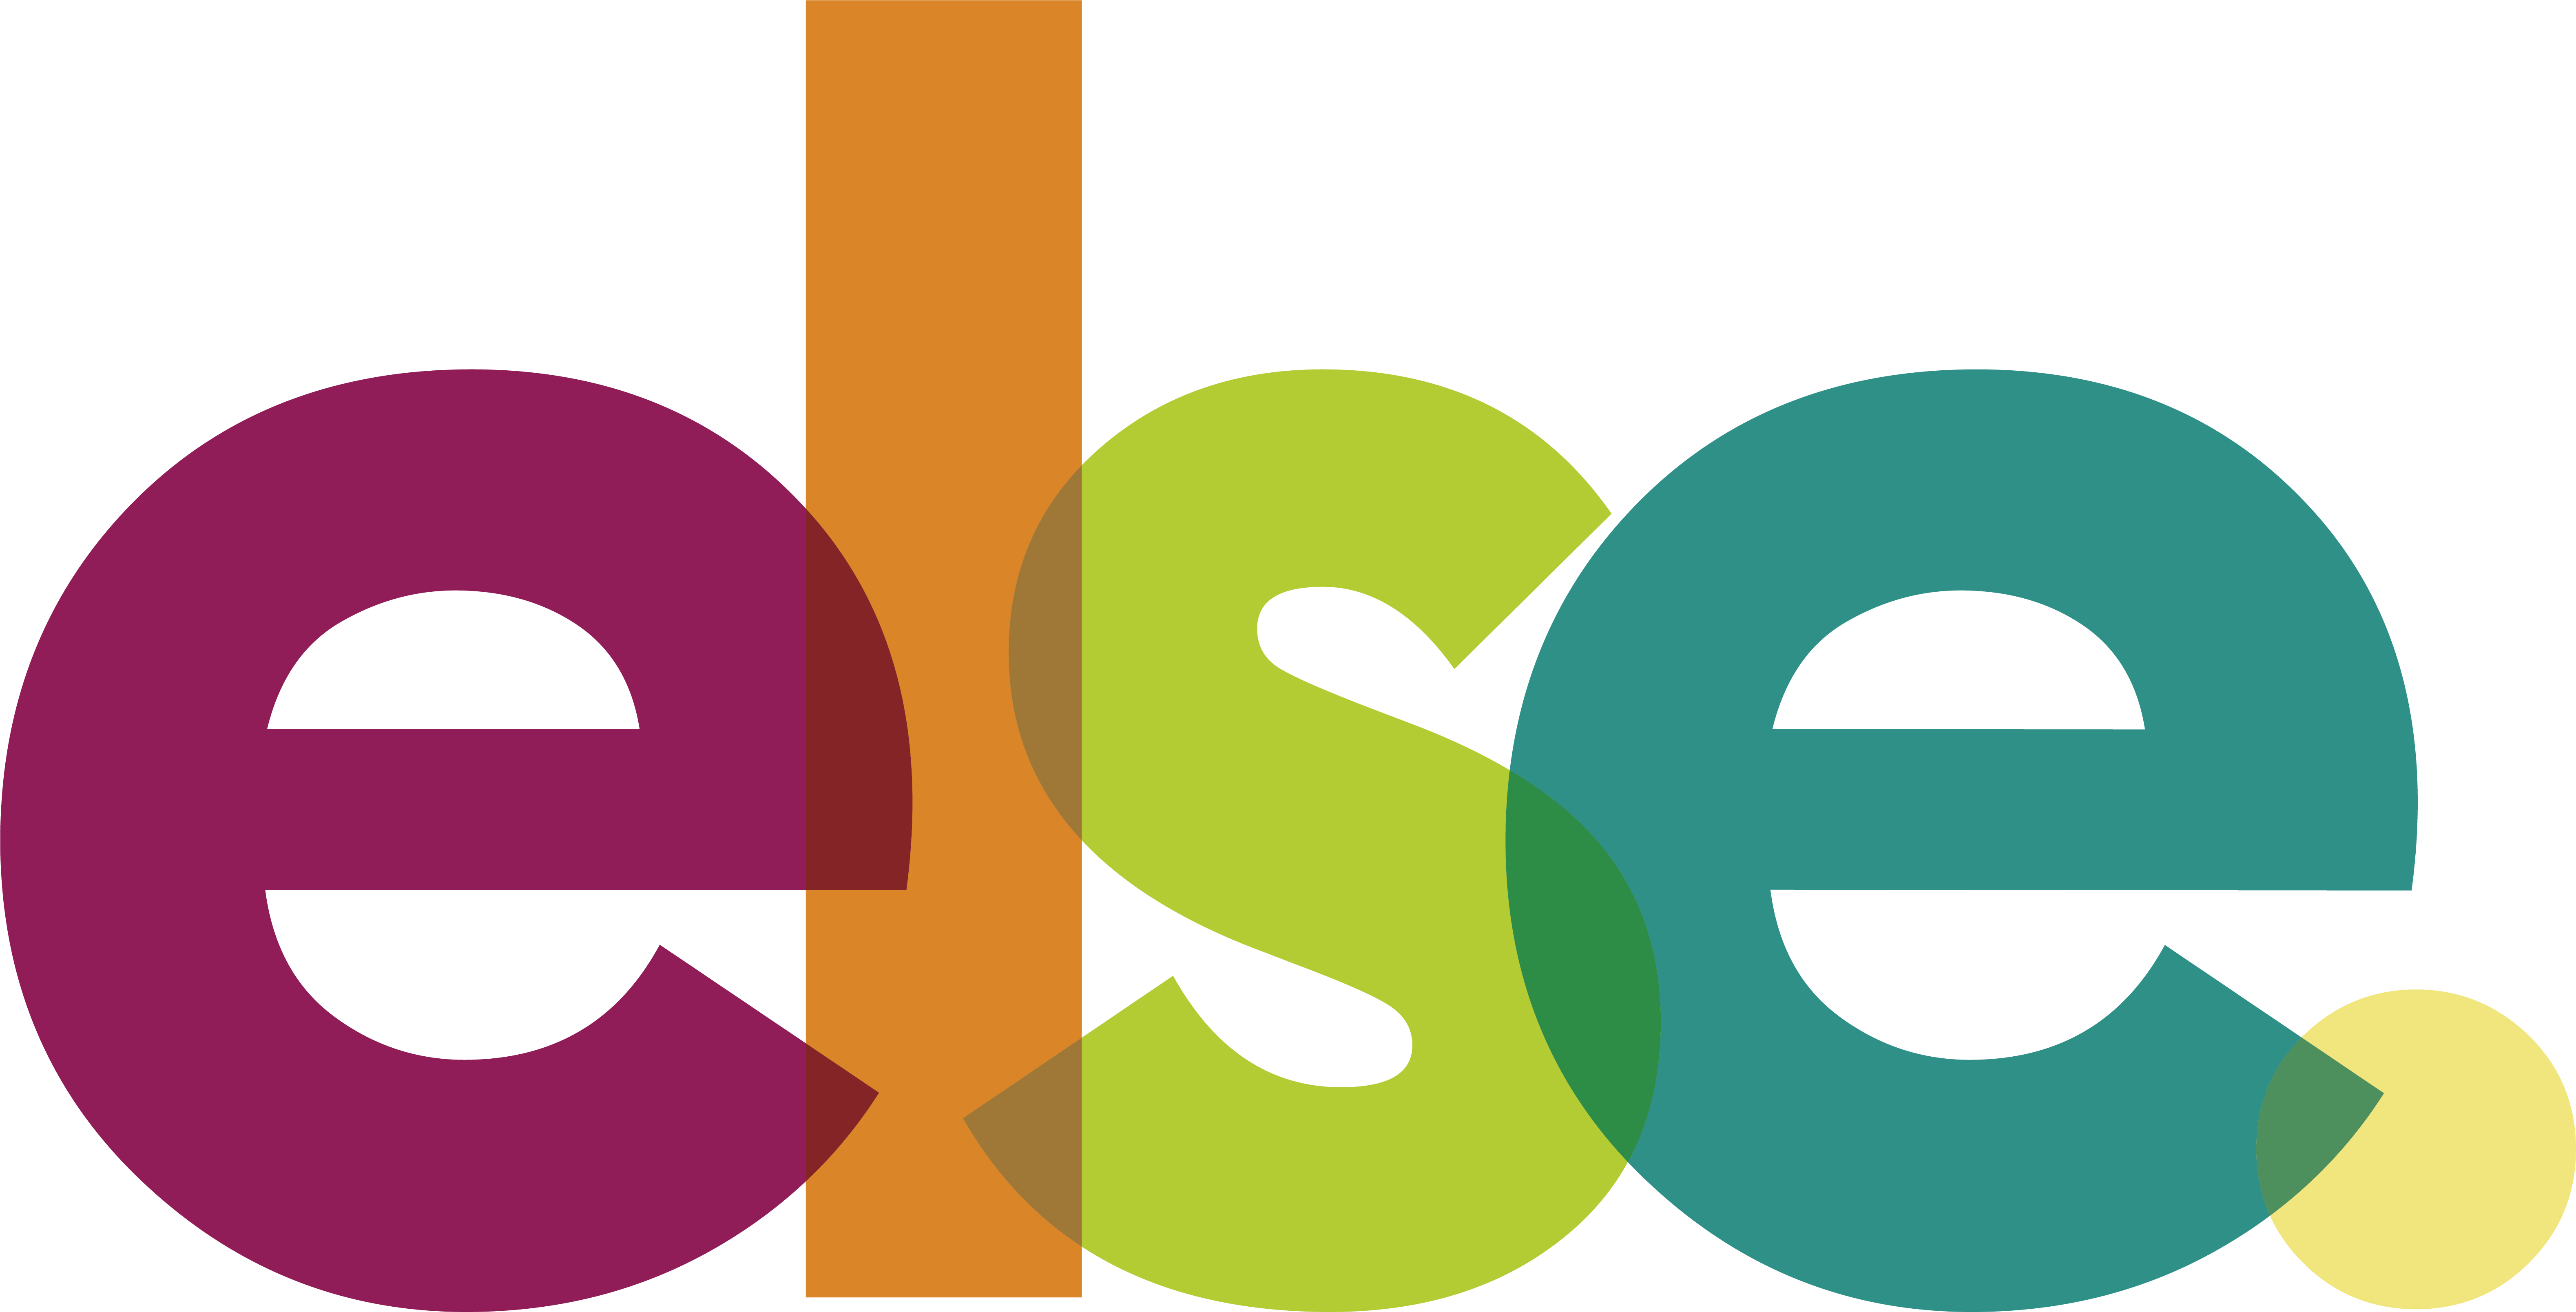 FINAL _corected colors_else logo to use.png